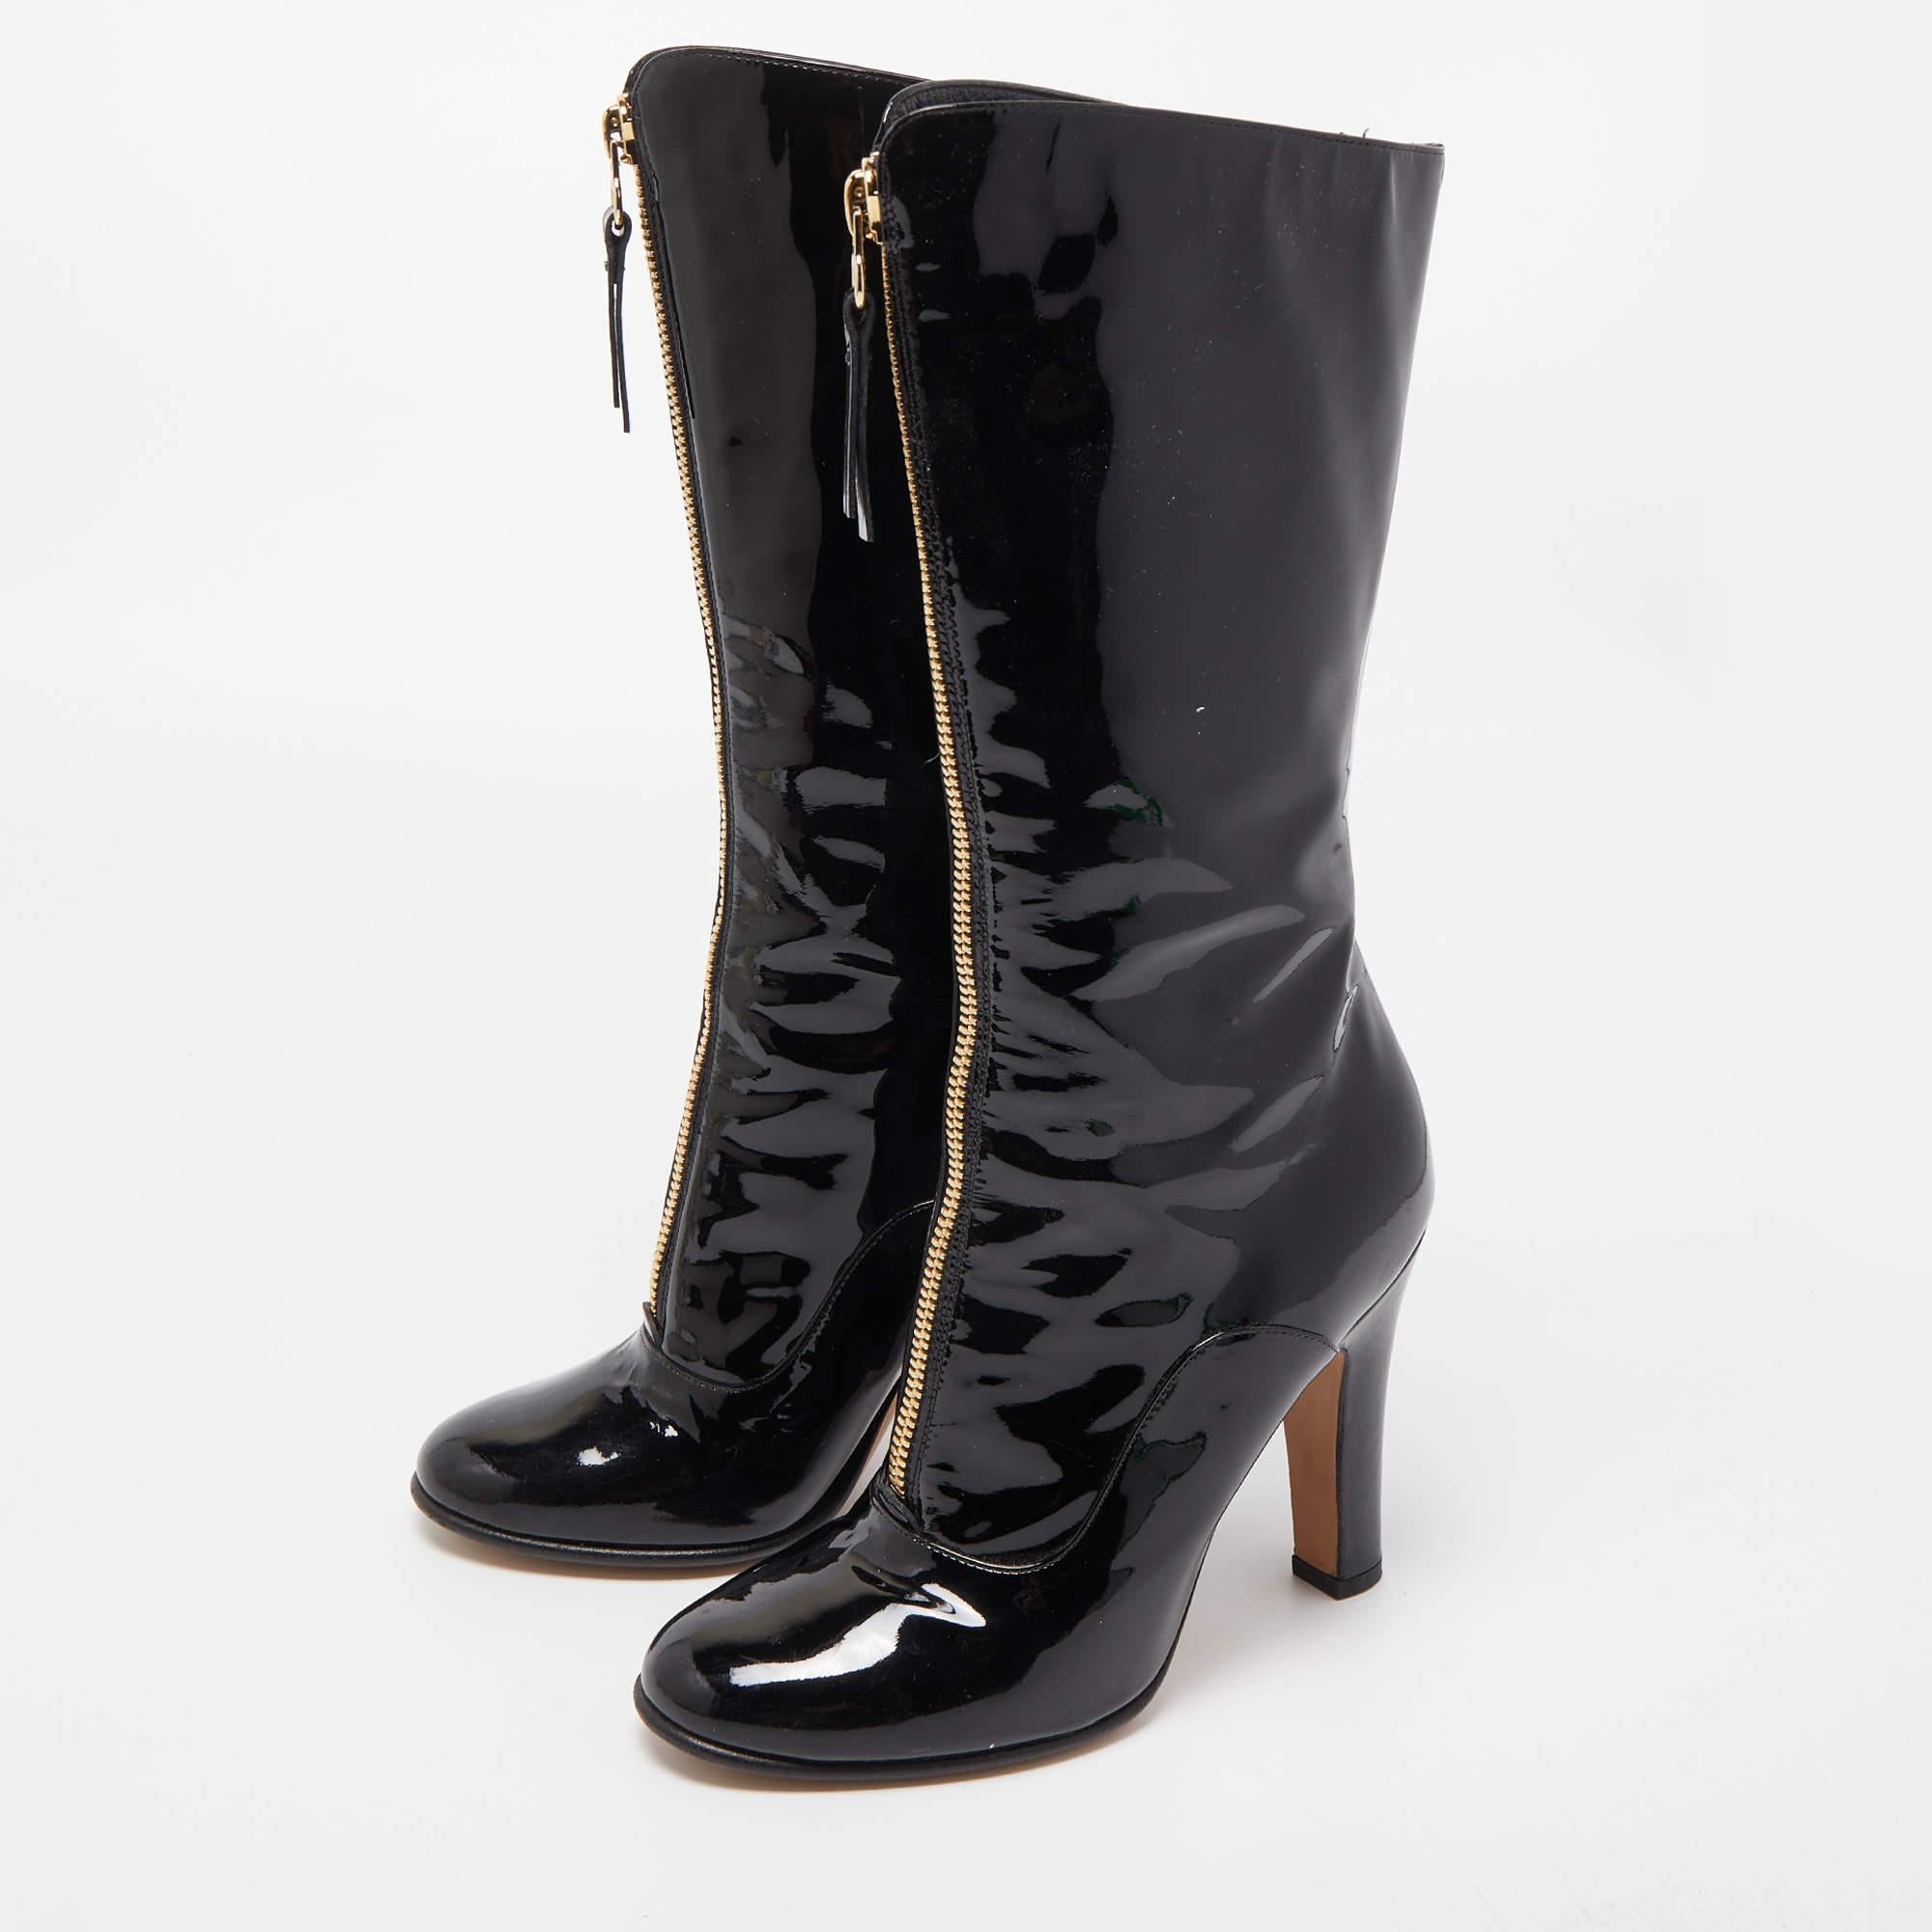 Women's Valentino Black Patent Leather Knee Length Boots Size 38